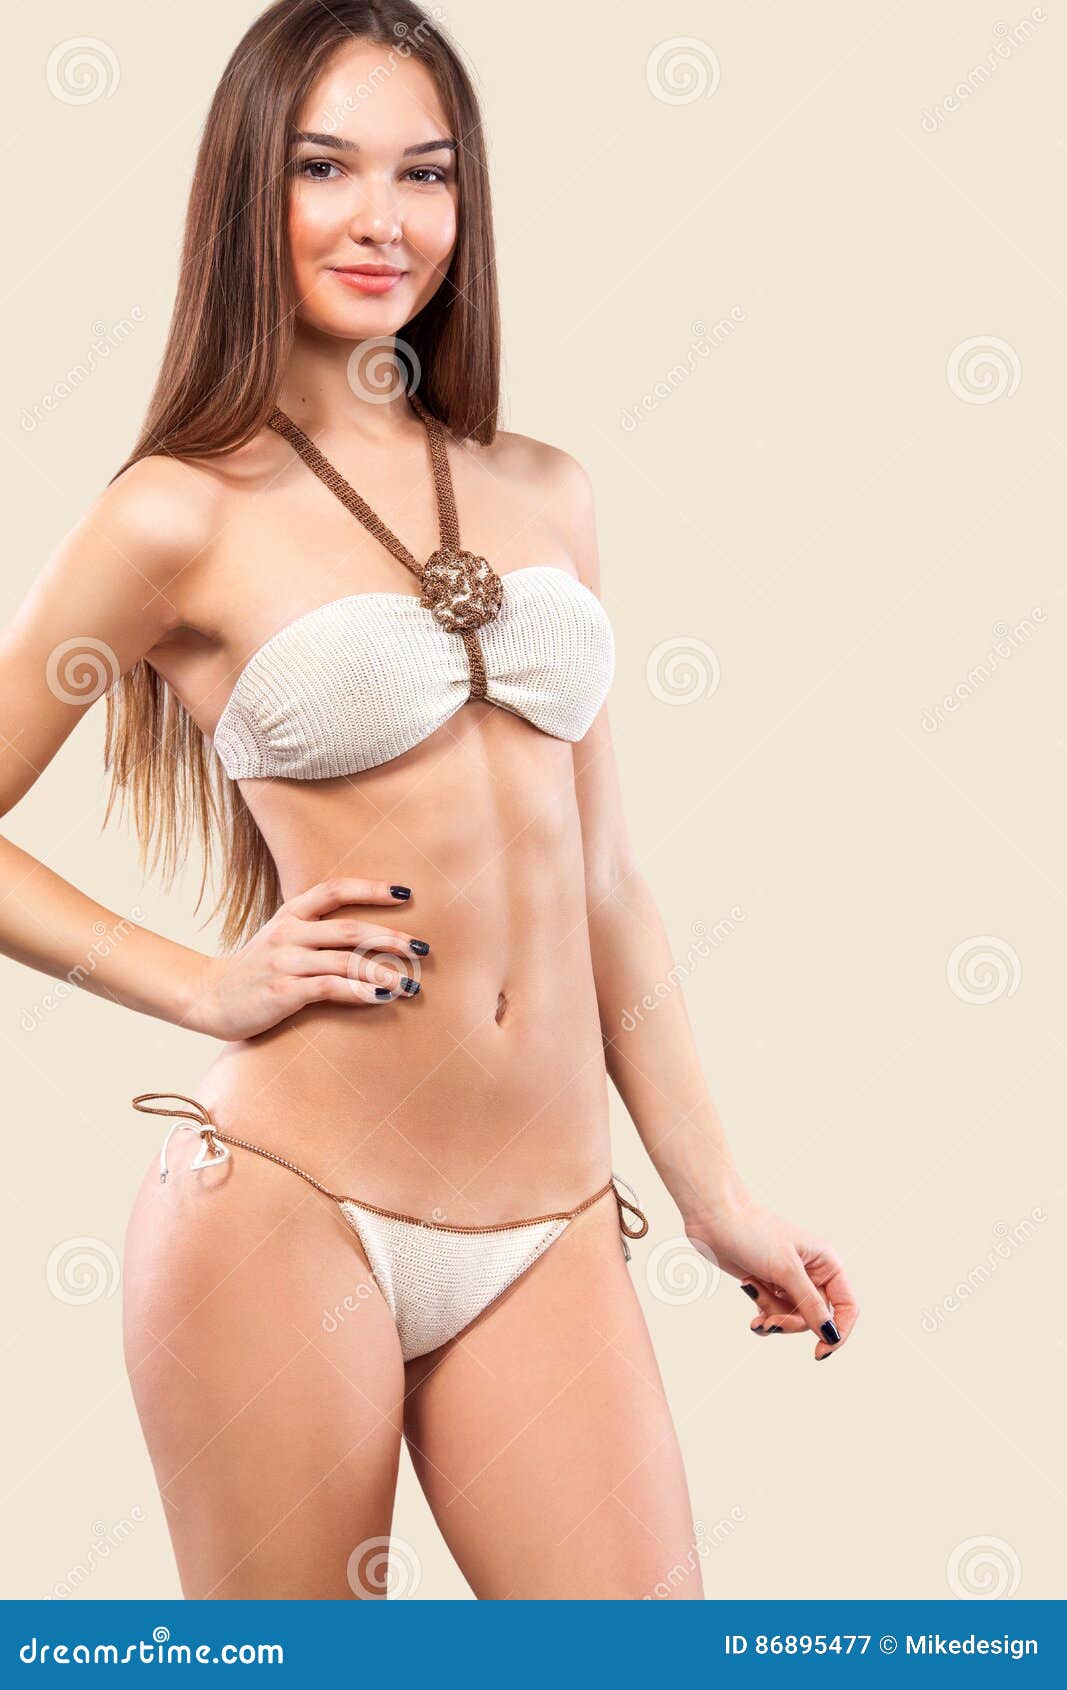 Blonde Woman Wearing Swimwear Posing on Color Background. Perfect Body pic